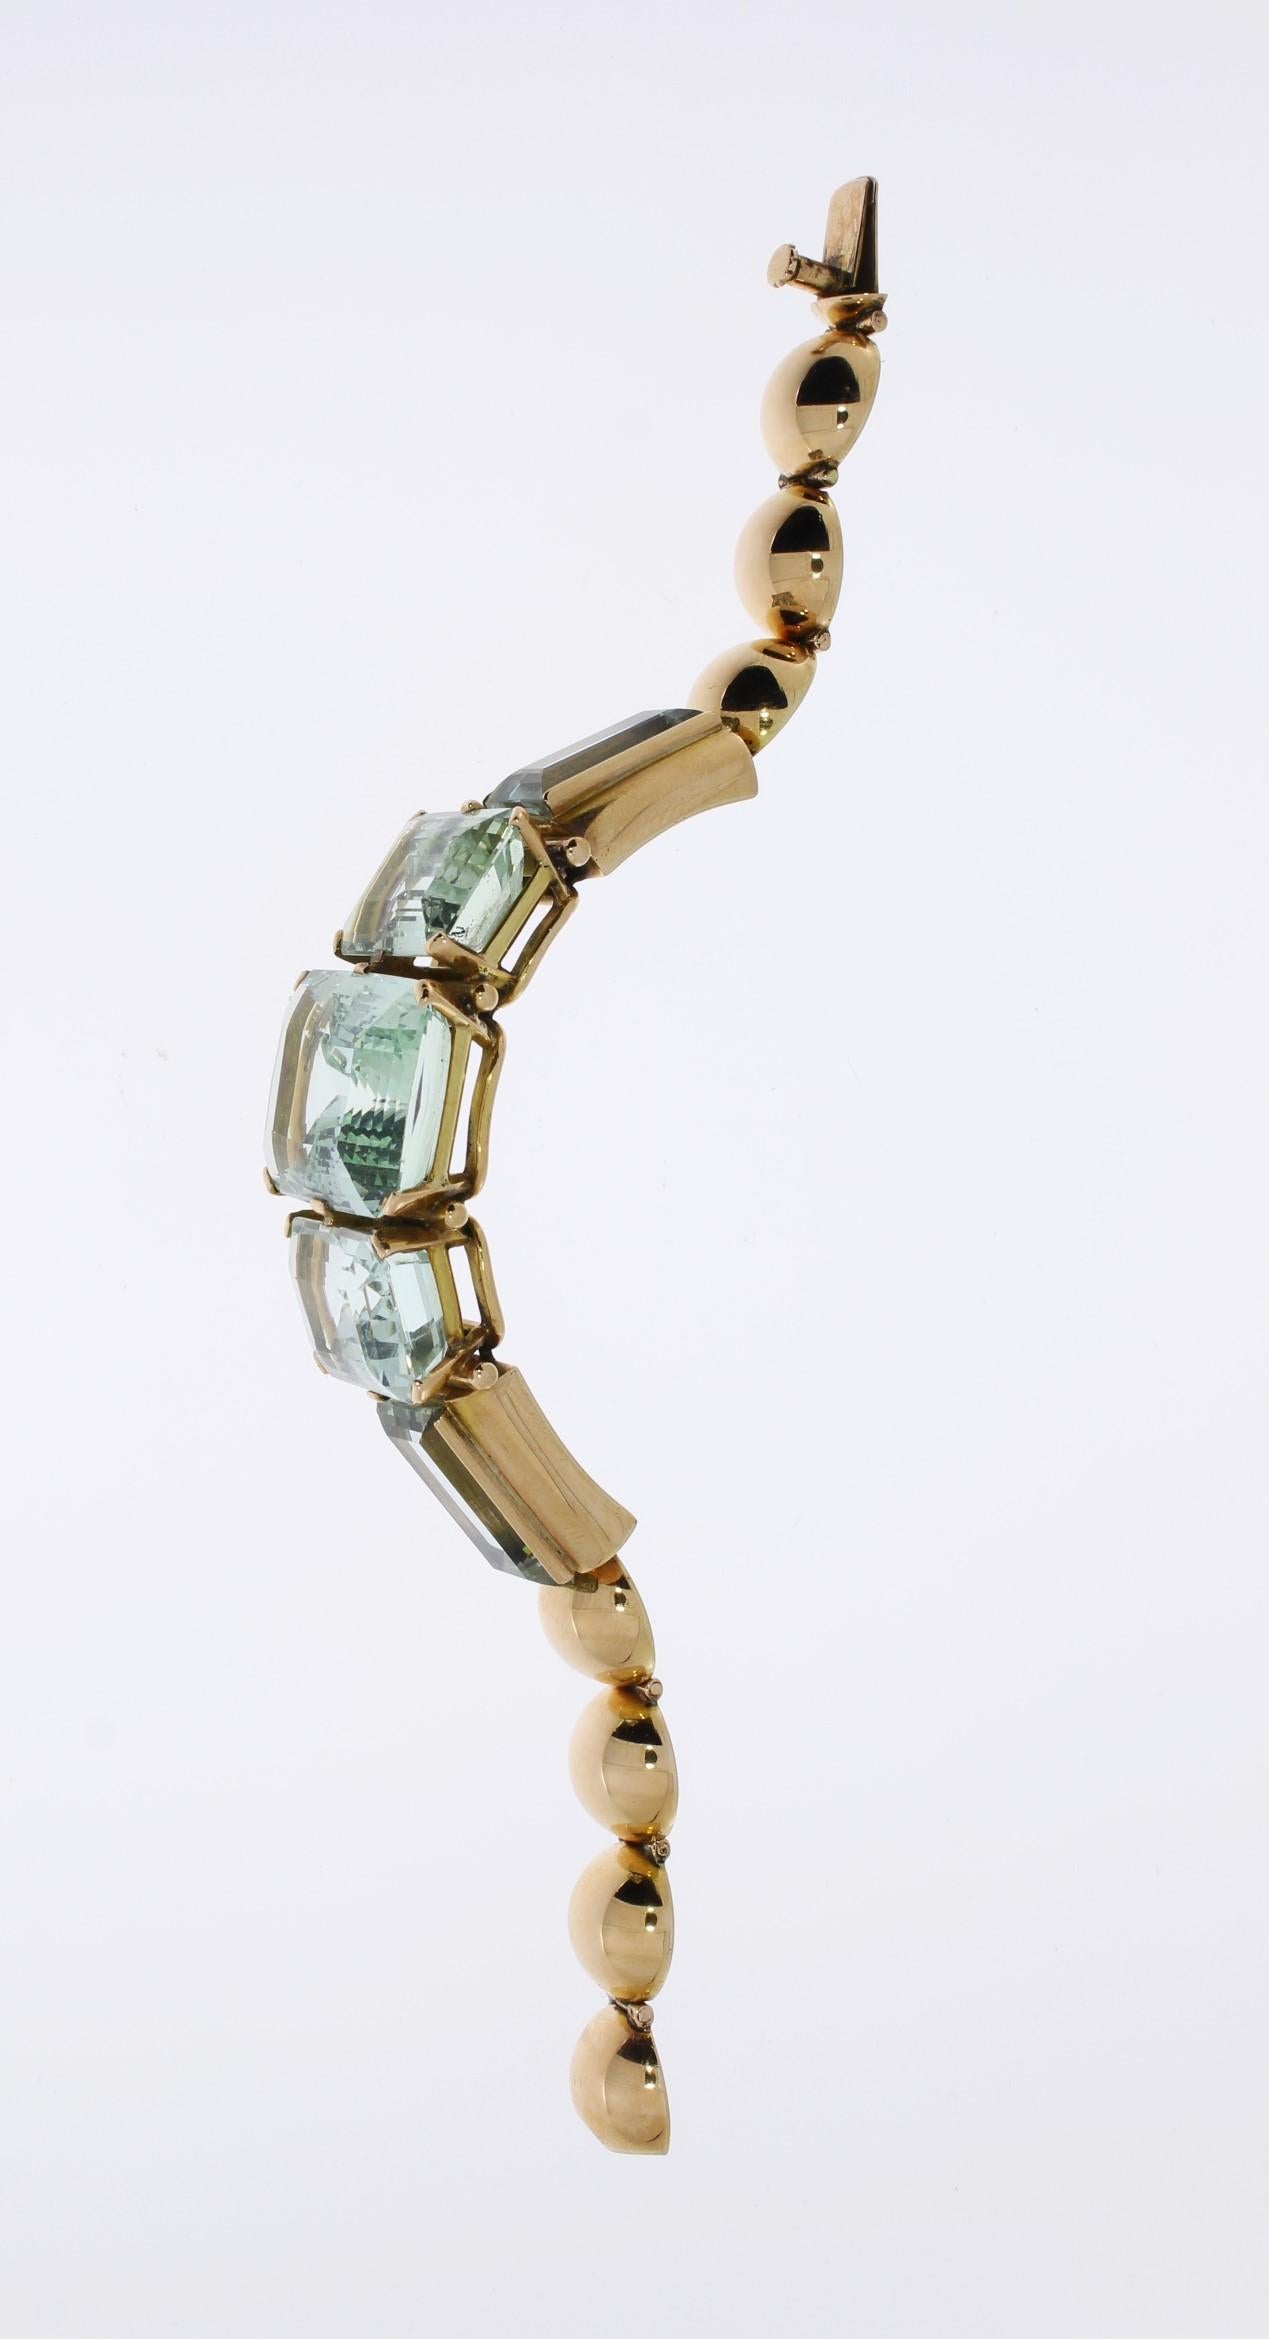 Art Deco, Argentina 1930's. 2 baguette-cut aquamarine and 3 aquamarine in emerald-cut with a total weight 76,39 carat. Mounted in 18 K red gold. Weight: 66,07 grams. Length: ca. 6,1 in ( 15,5 cm ), Width: 0.55-0.91 in ( 1,4-2,3 cm )